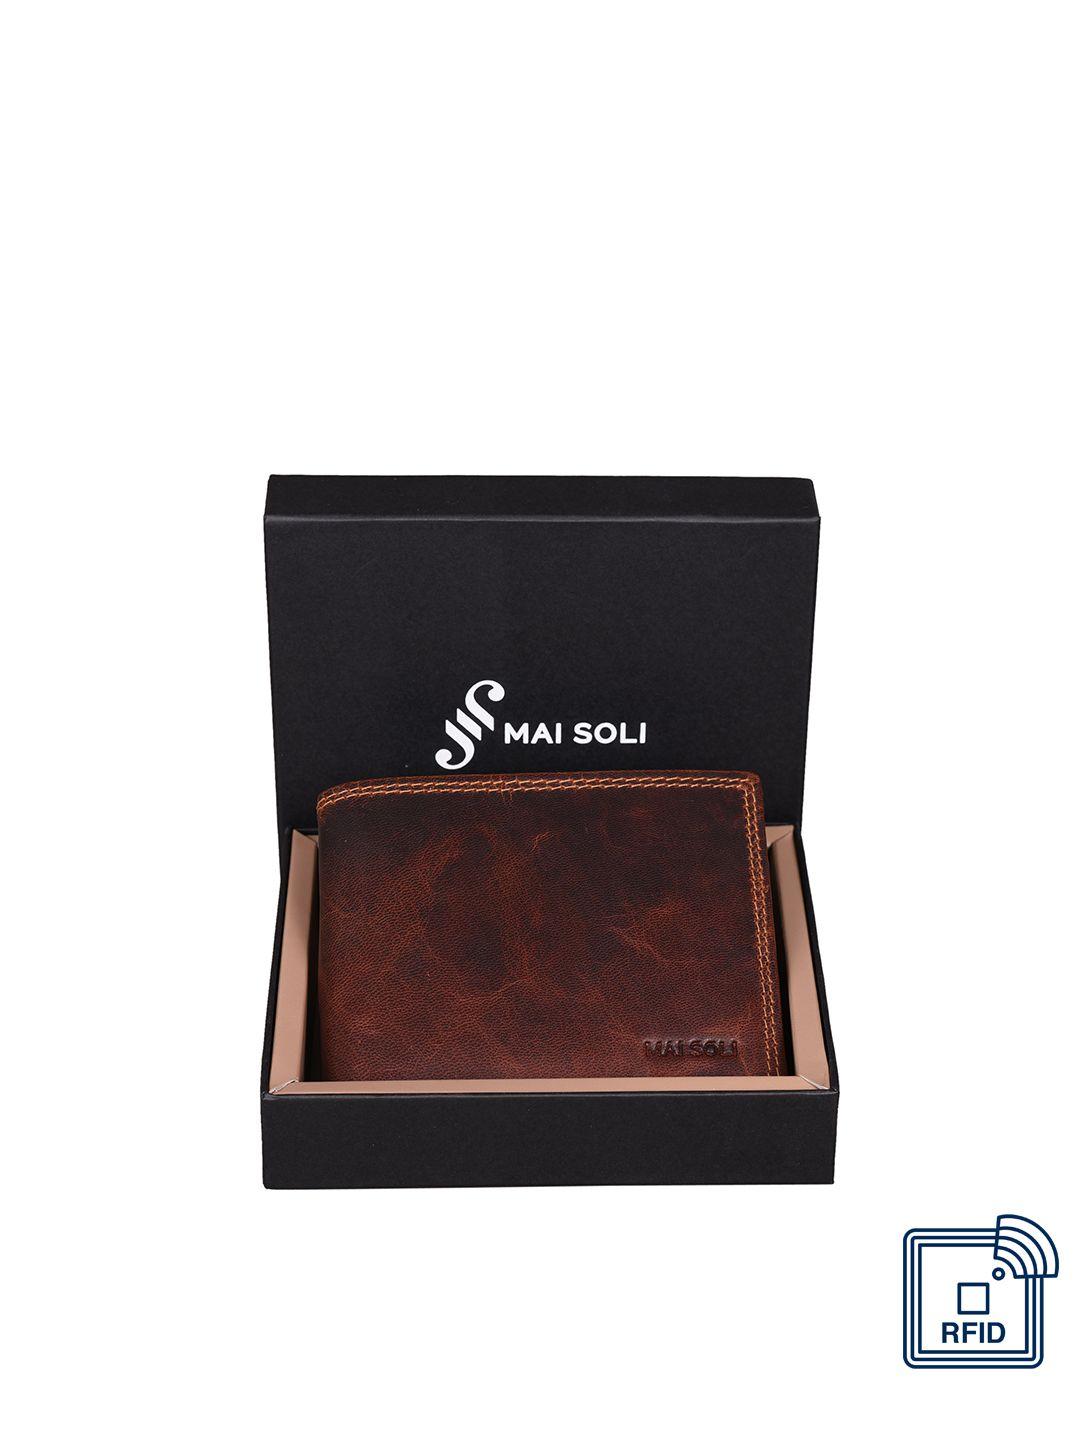 mai soli men brown genuine leather rfid protected two fold wallet with sideways flap